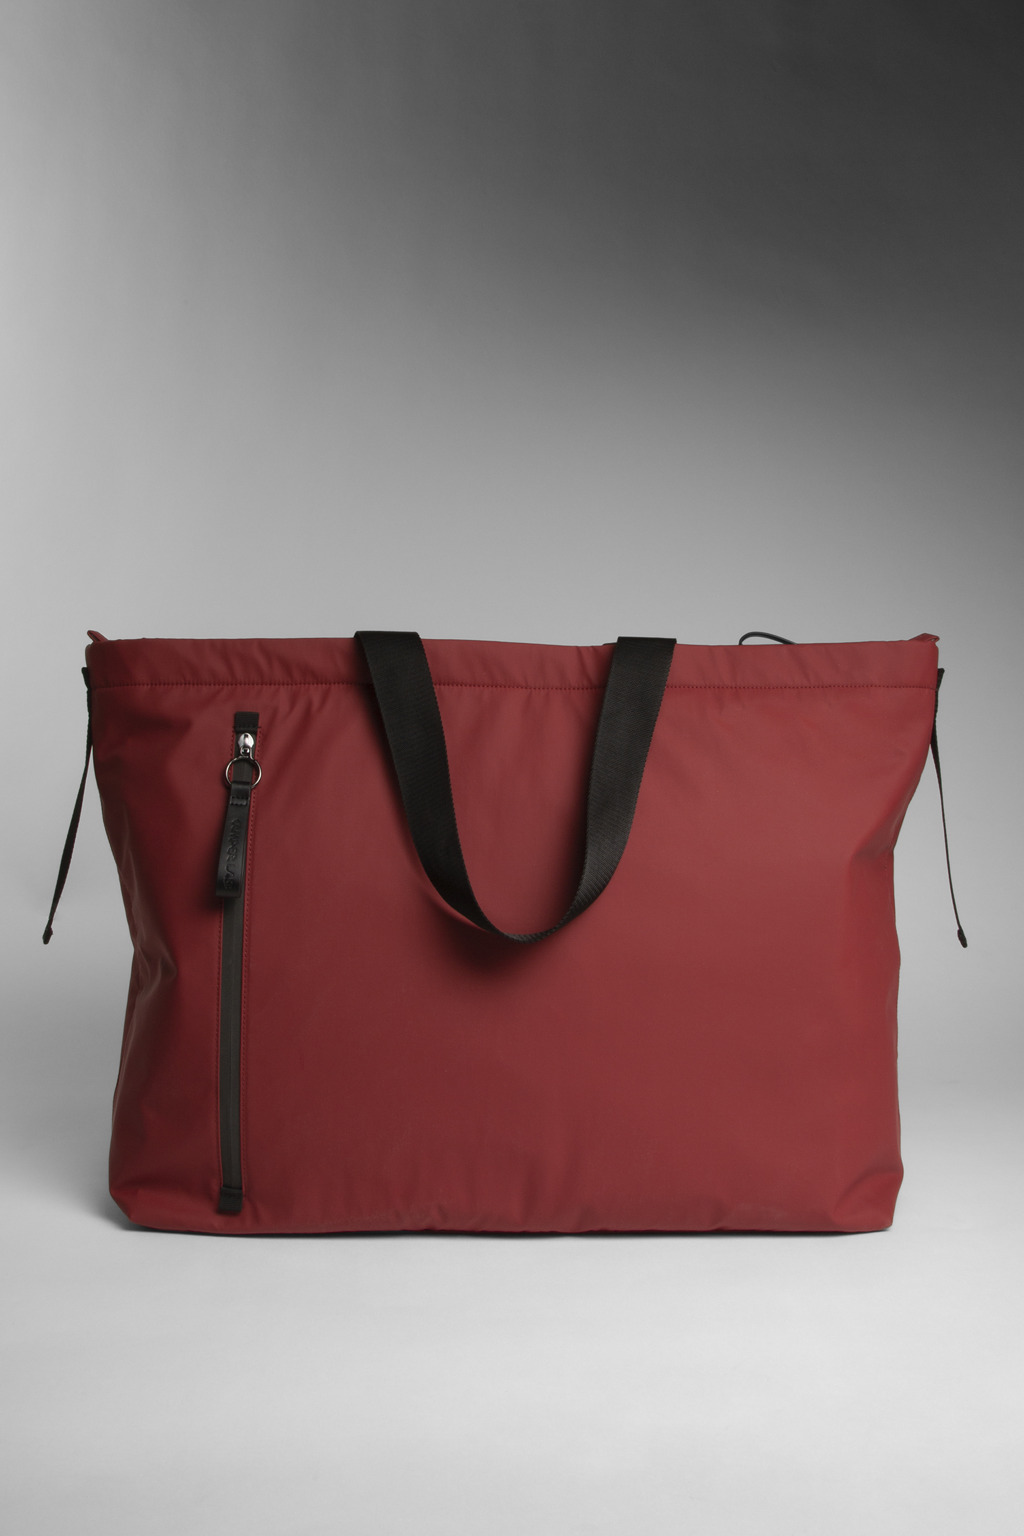 Red Bags & Accessories for Unisex - Fall/Winter collection - Camper USA